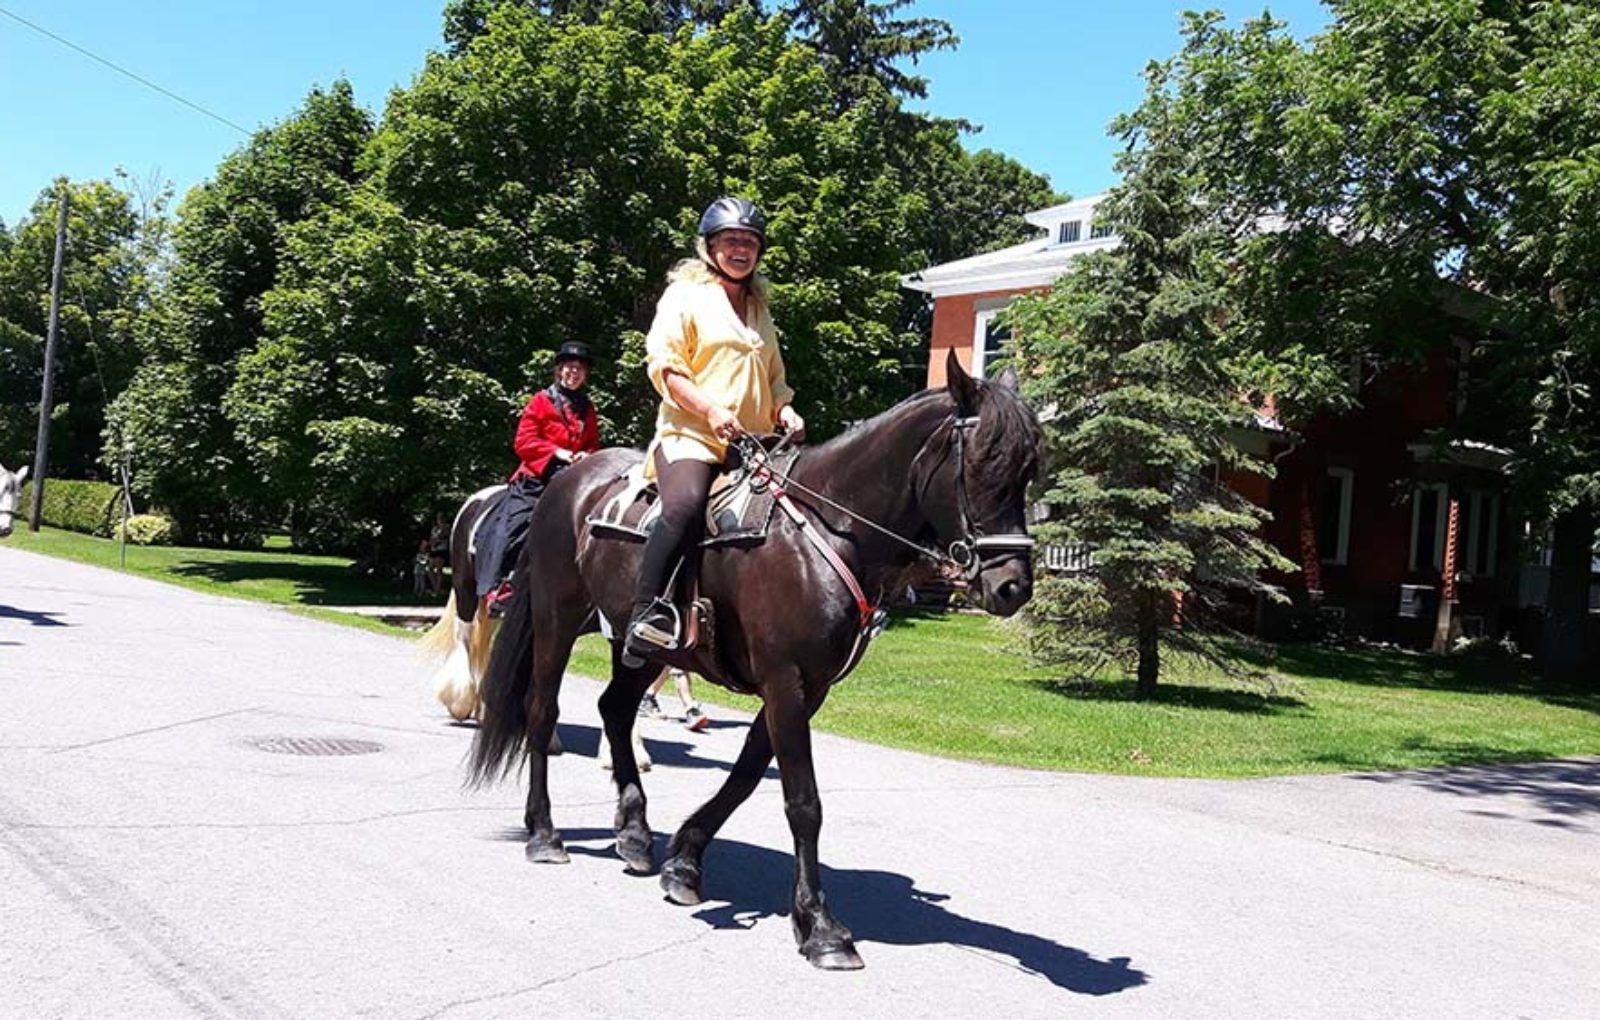 LS_July 10 2019 Horse and Buggy Parade (9)